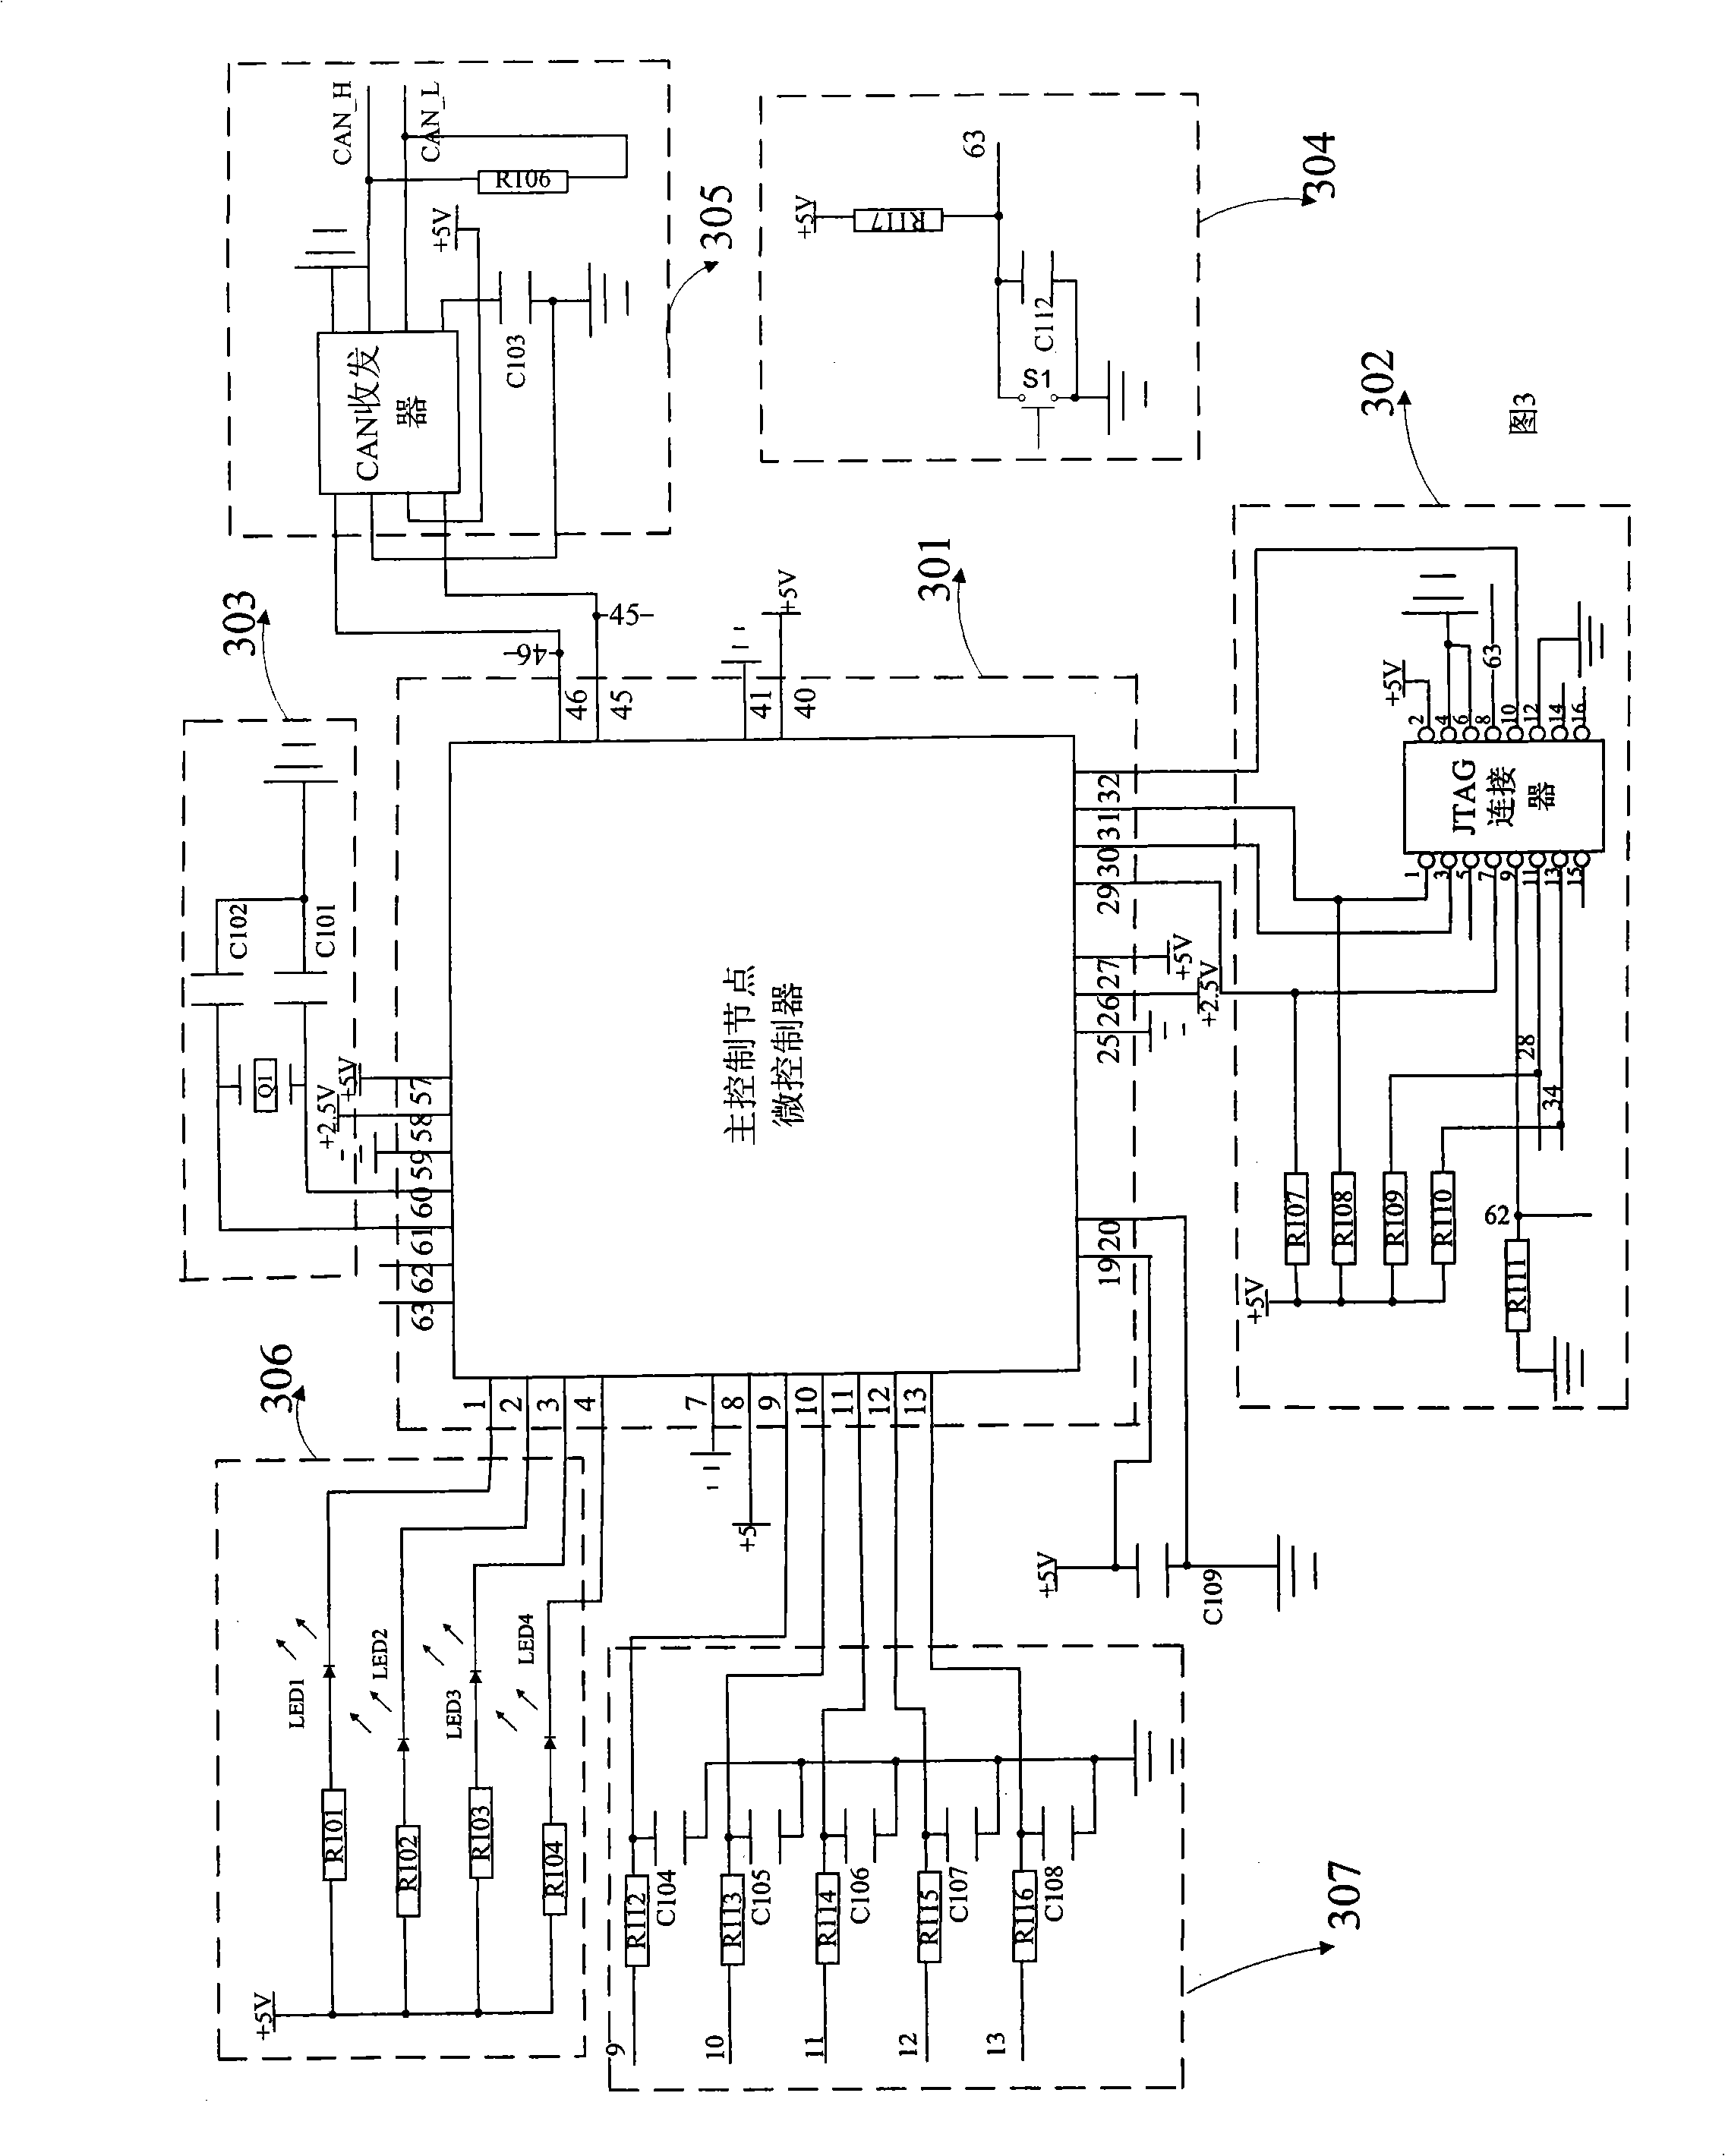 Electric mechanical type brake system electric control unit based on CAN bus network communication